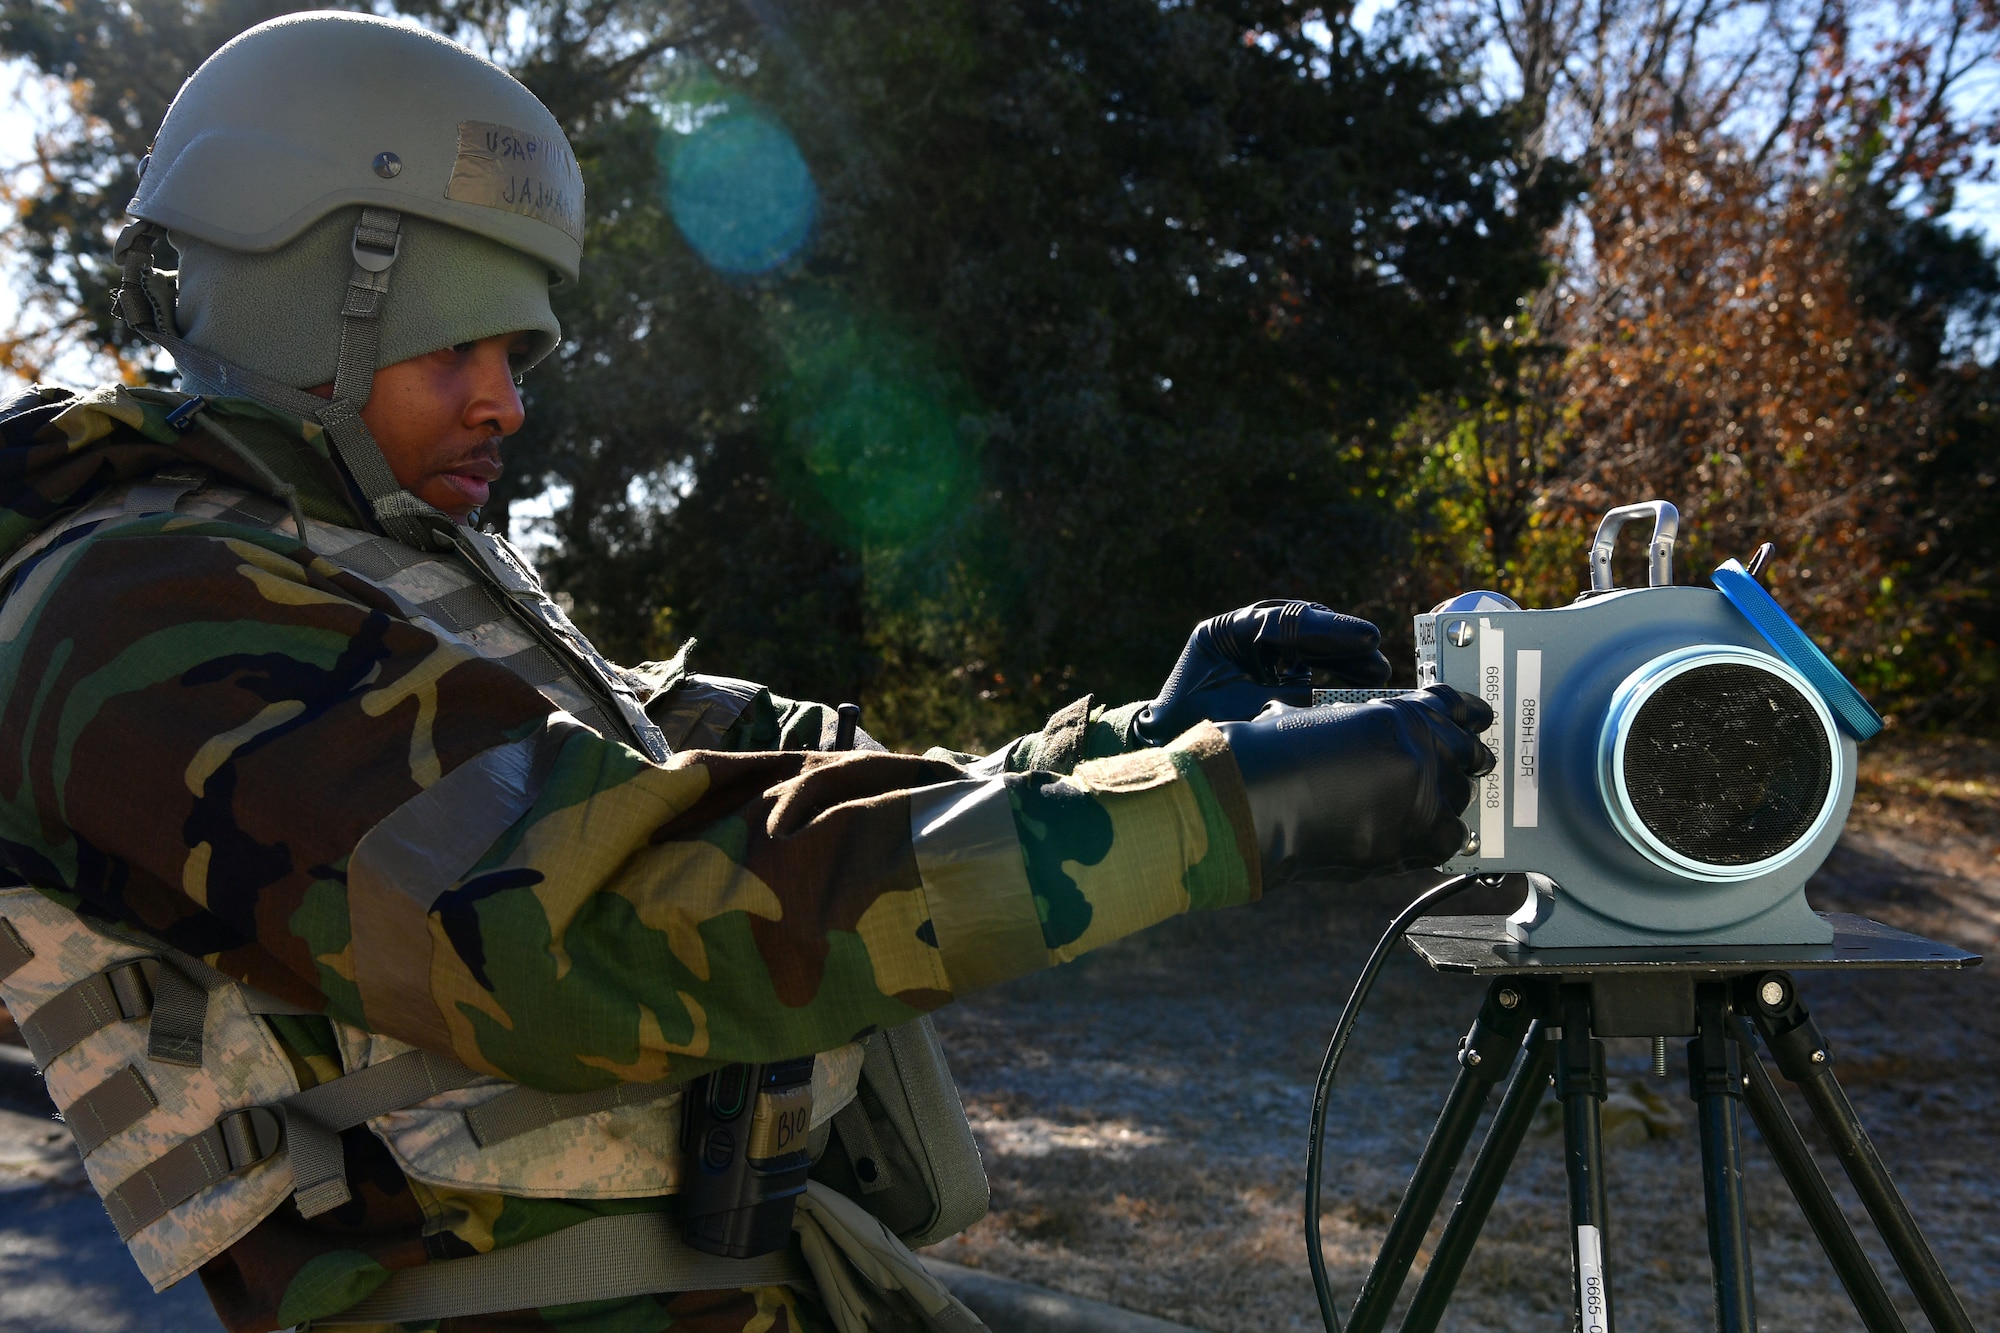 An airman uses a tool to detect radiation